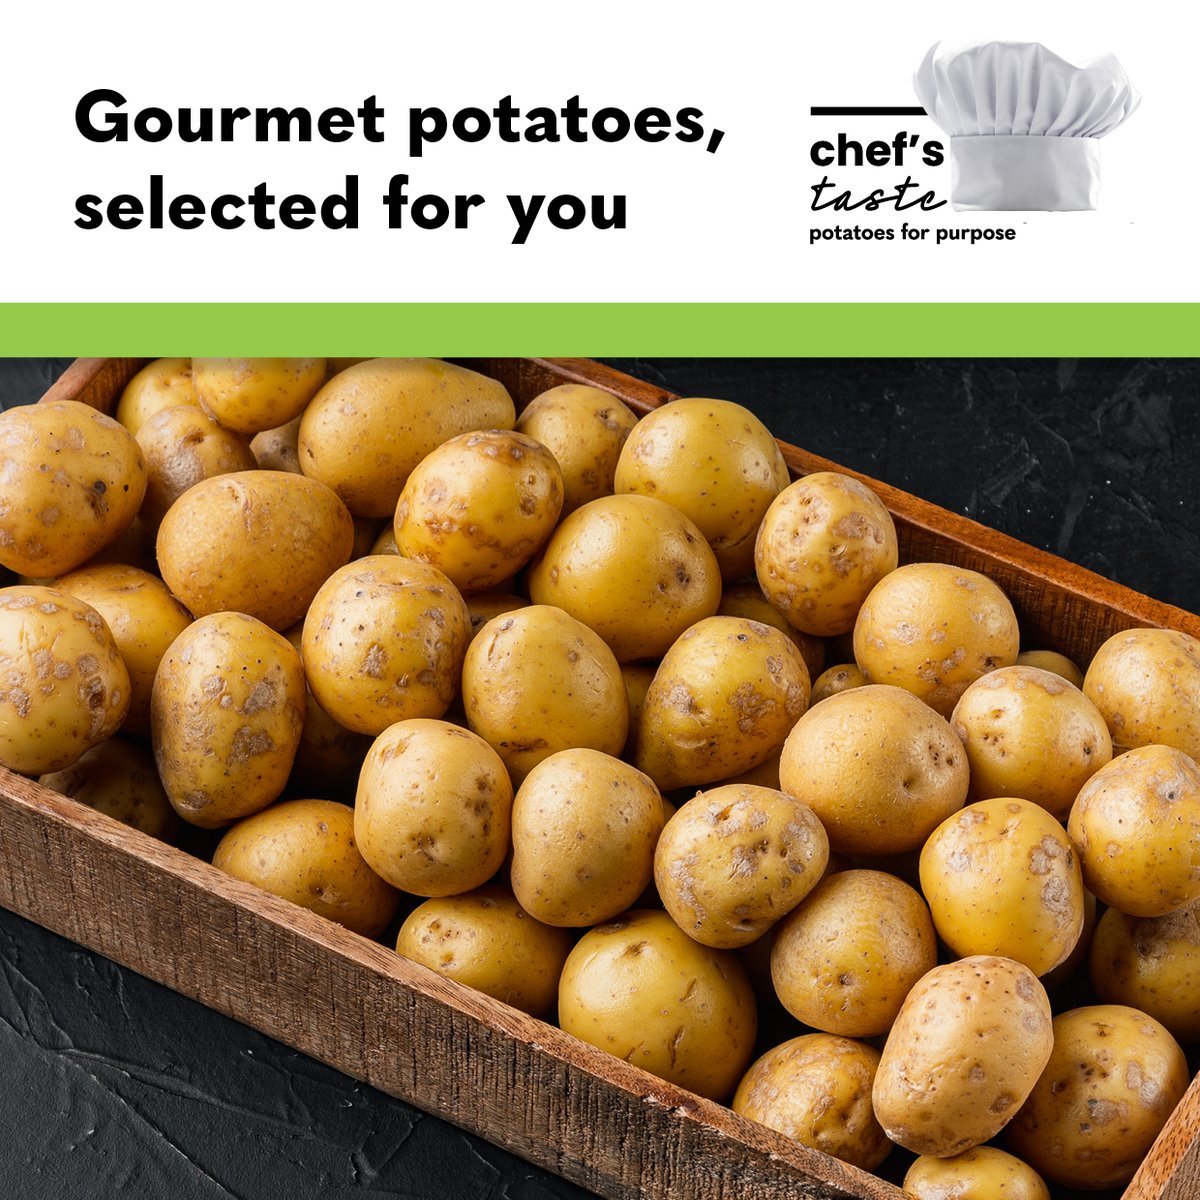 Chef’s Taste is our unique, gourmet range of fresh potatoes. Working with renowned chefs we have developed the ideal potato for every culinary purpose. Explore our range: linwoodcrops.com/chefs-taste/